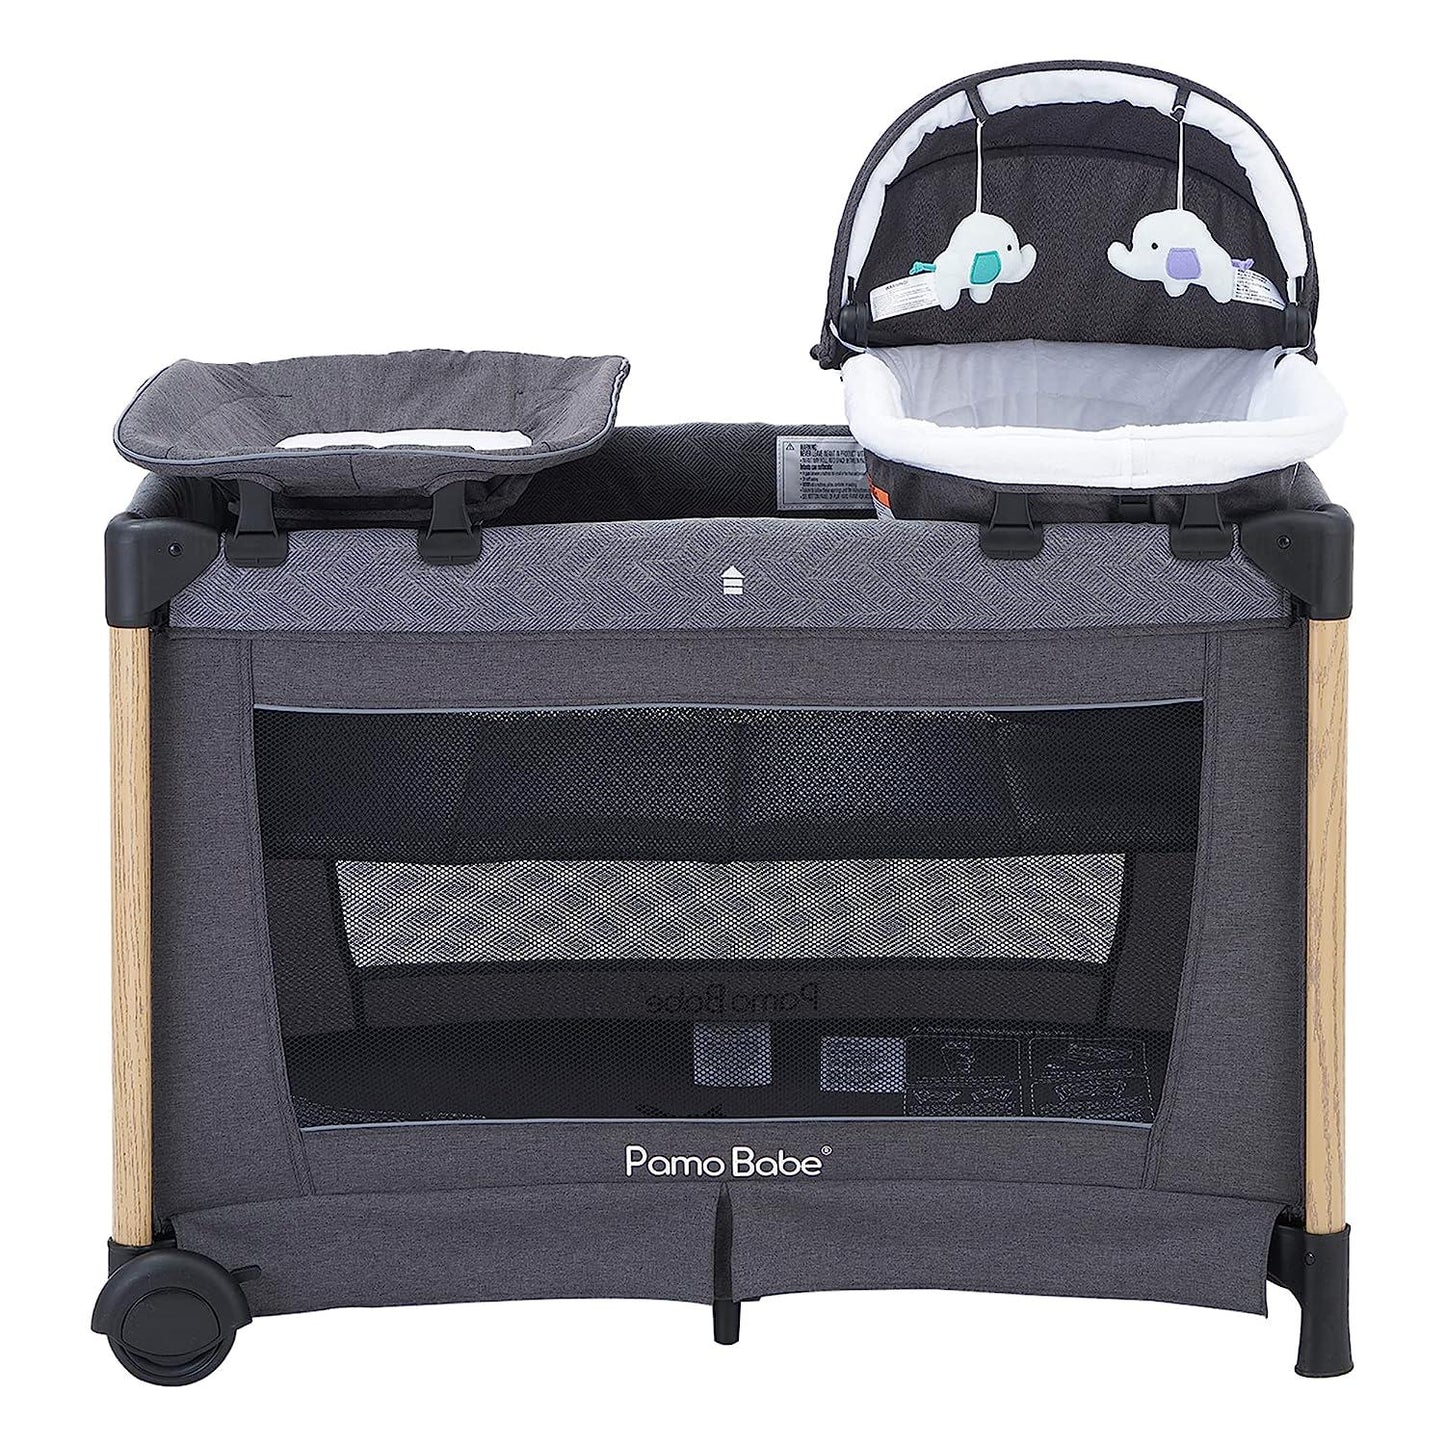 Deluxe Baby Playard with Foldable Mattress, Large Changing Table Detachable Childcare Center (Black)